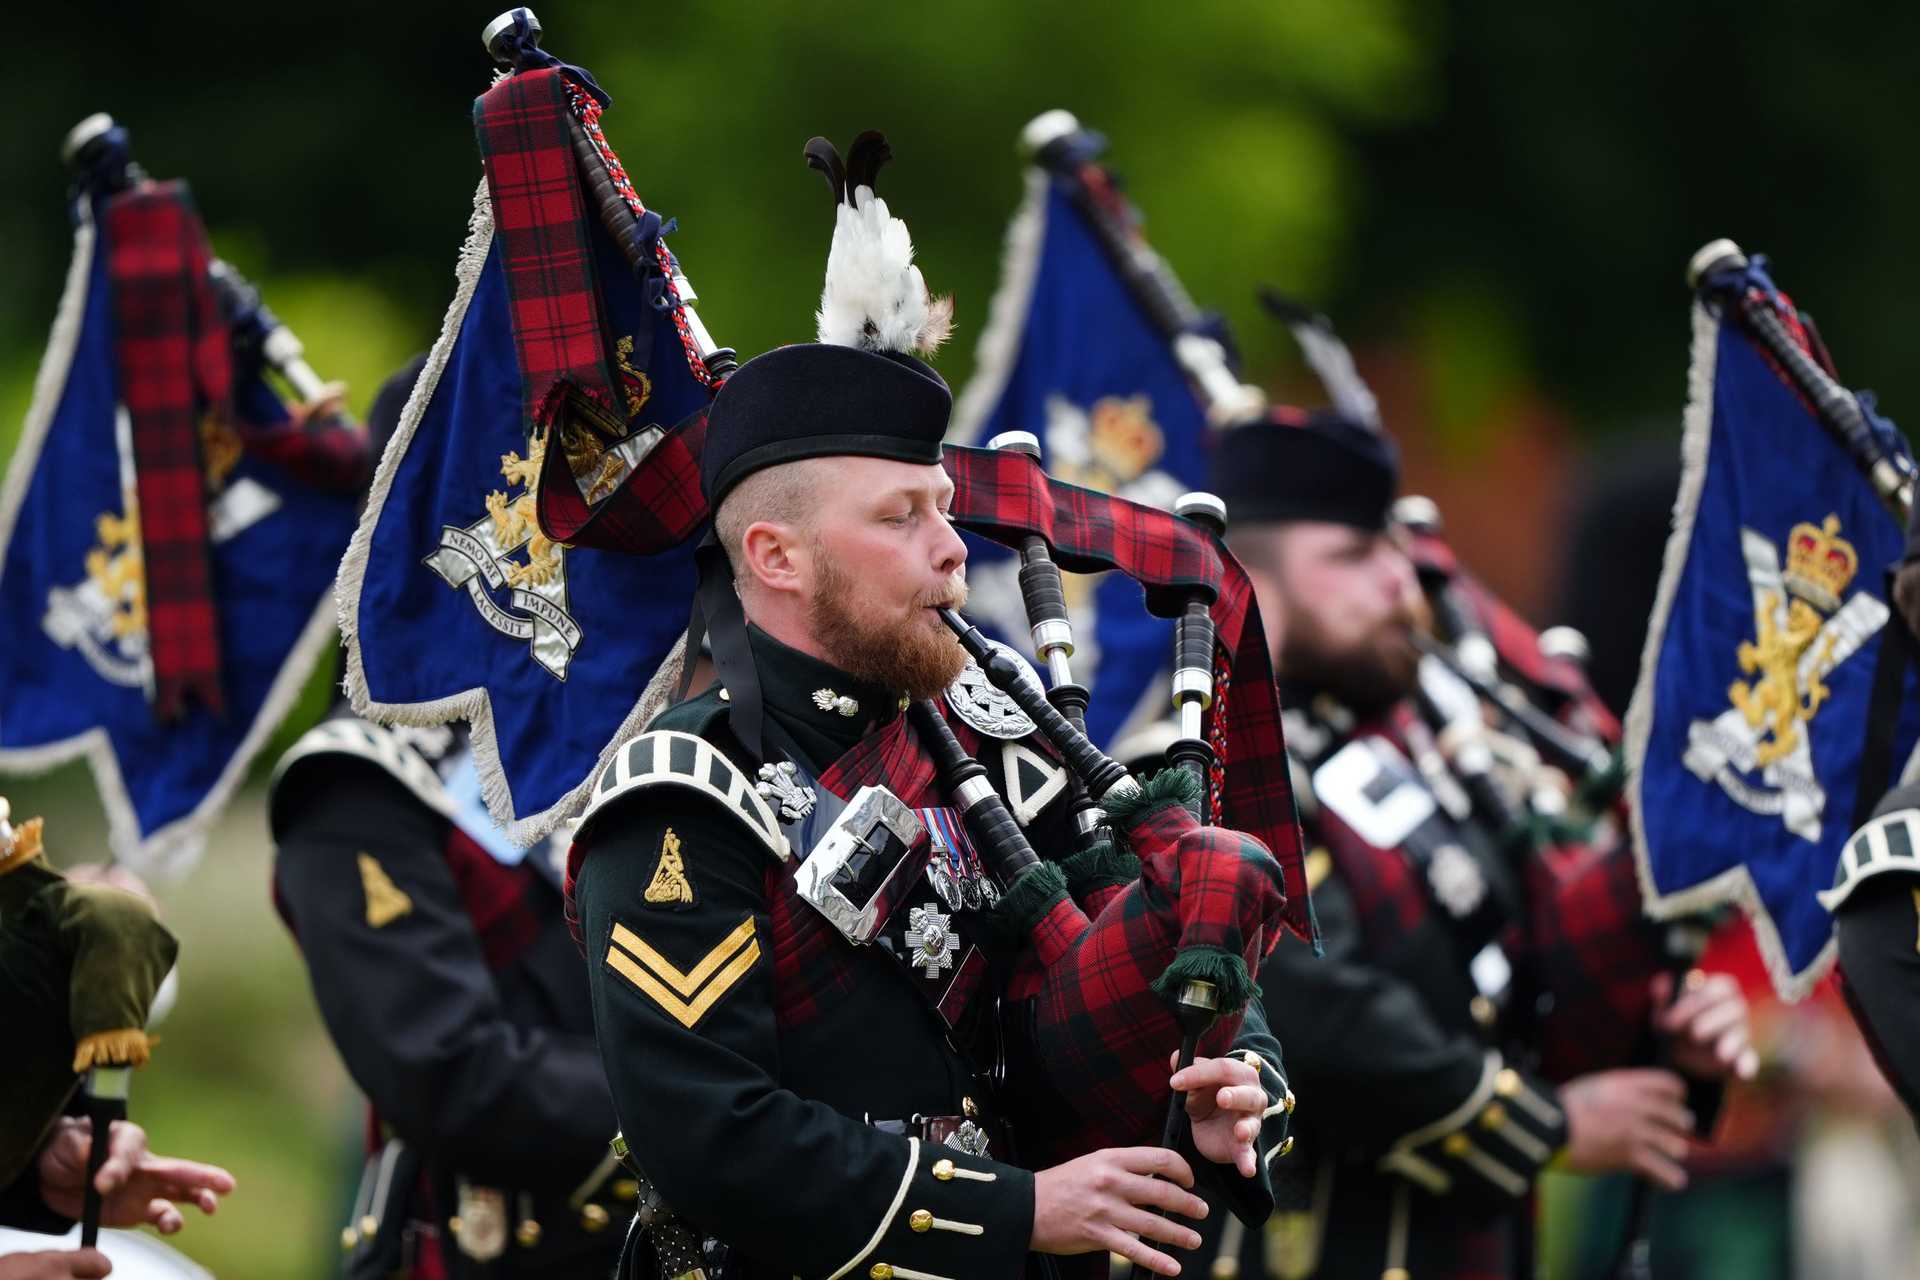 Soldiers from the Royal Regiment of Scotland took part in the ceremony in Edinburgh at the start of the King’s trip to Scotland for Holyrood Week (Andrew Milligan/PA) 